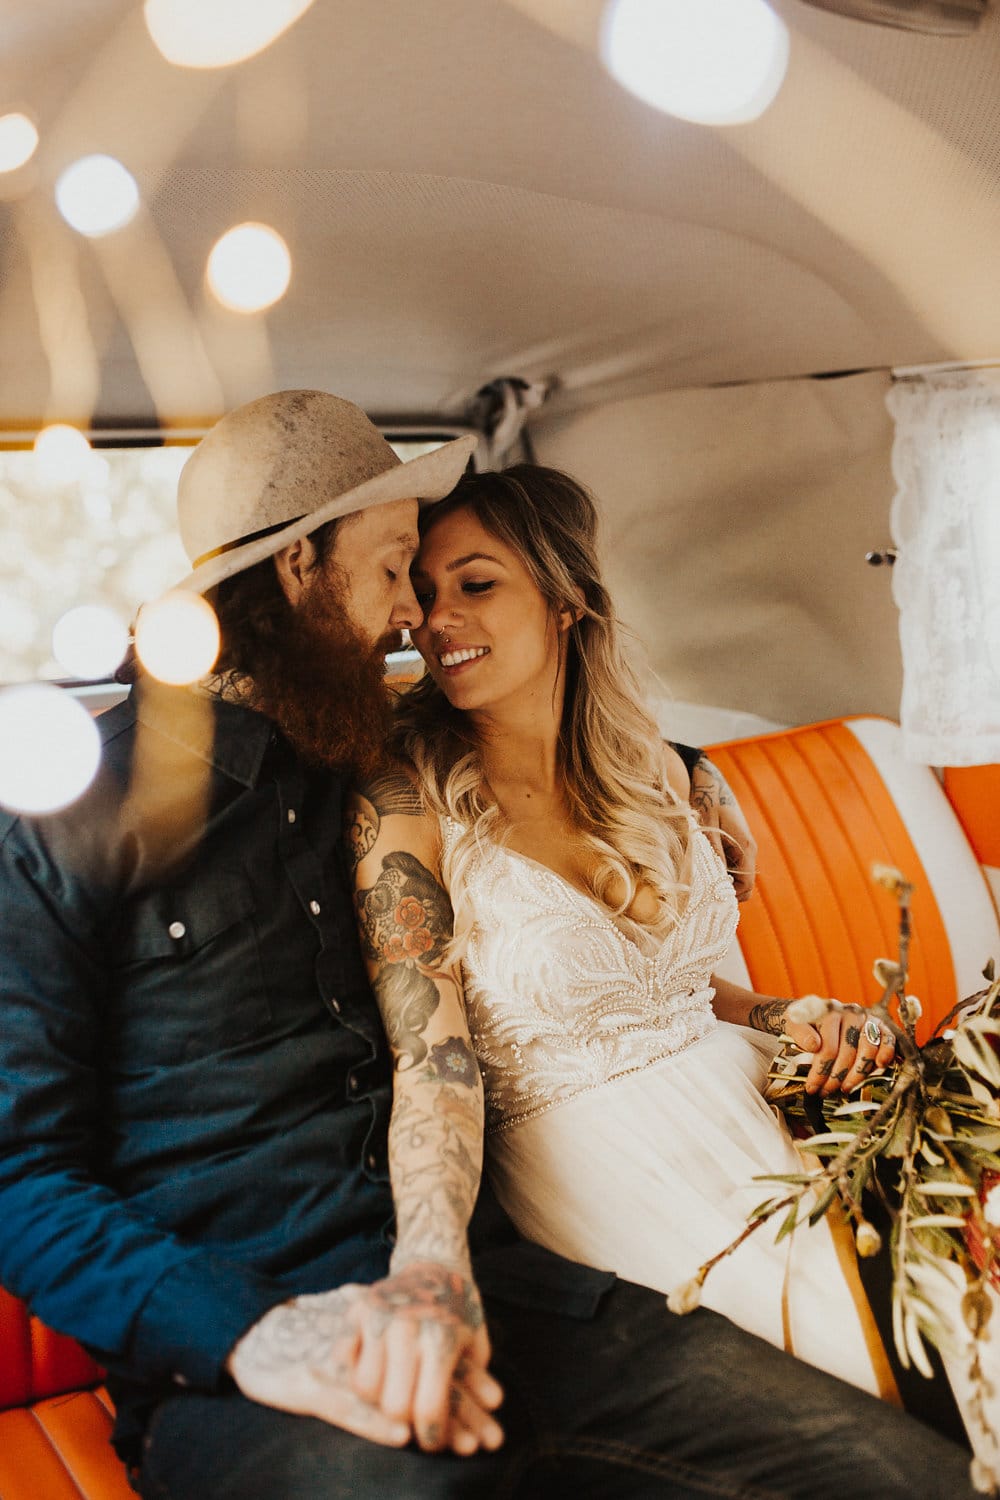 Rock ‘N’ Roll Styled Shoot Featuring Beaded Lace Gown and Camper Van. Charlene wedding dress by Maggie Sottero.